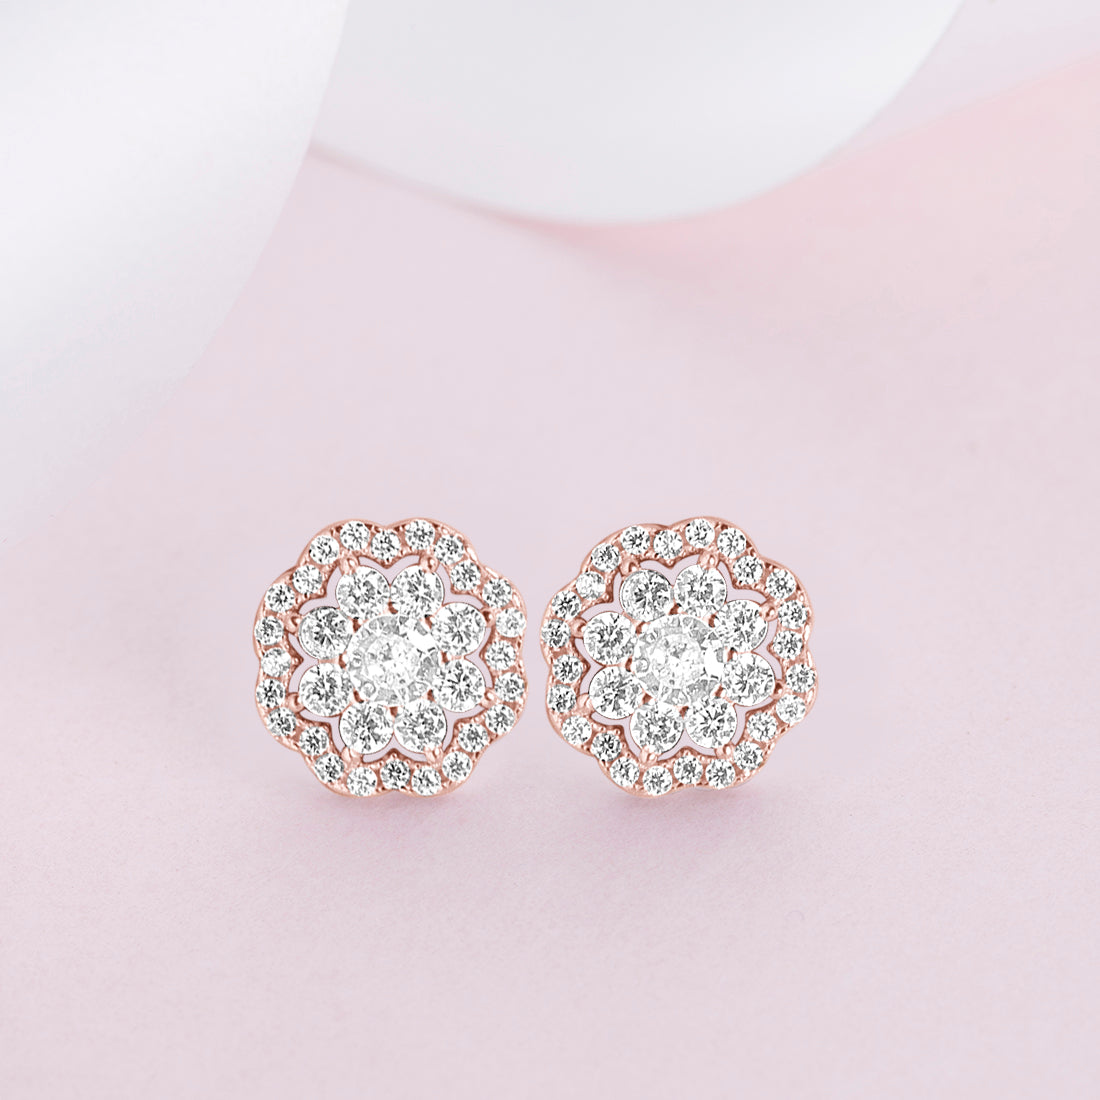 Floral CZ Studded Rose Gold 925 Sterling Silver Stud Earrings